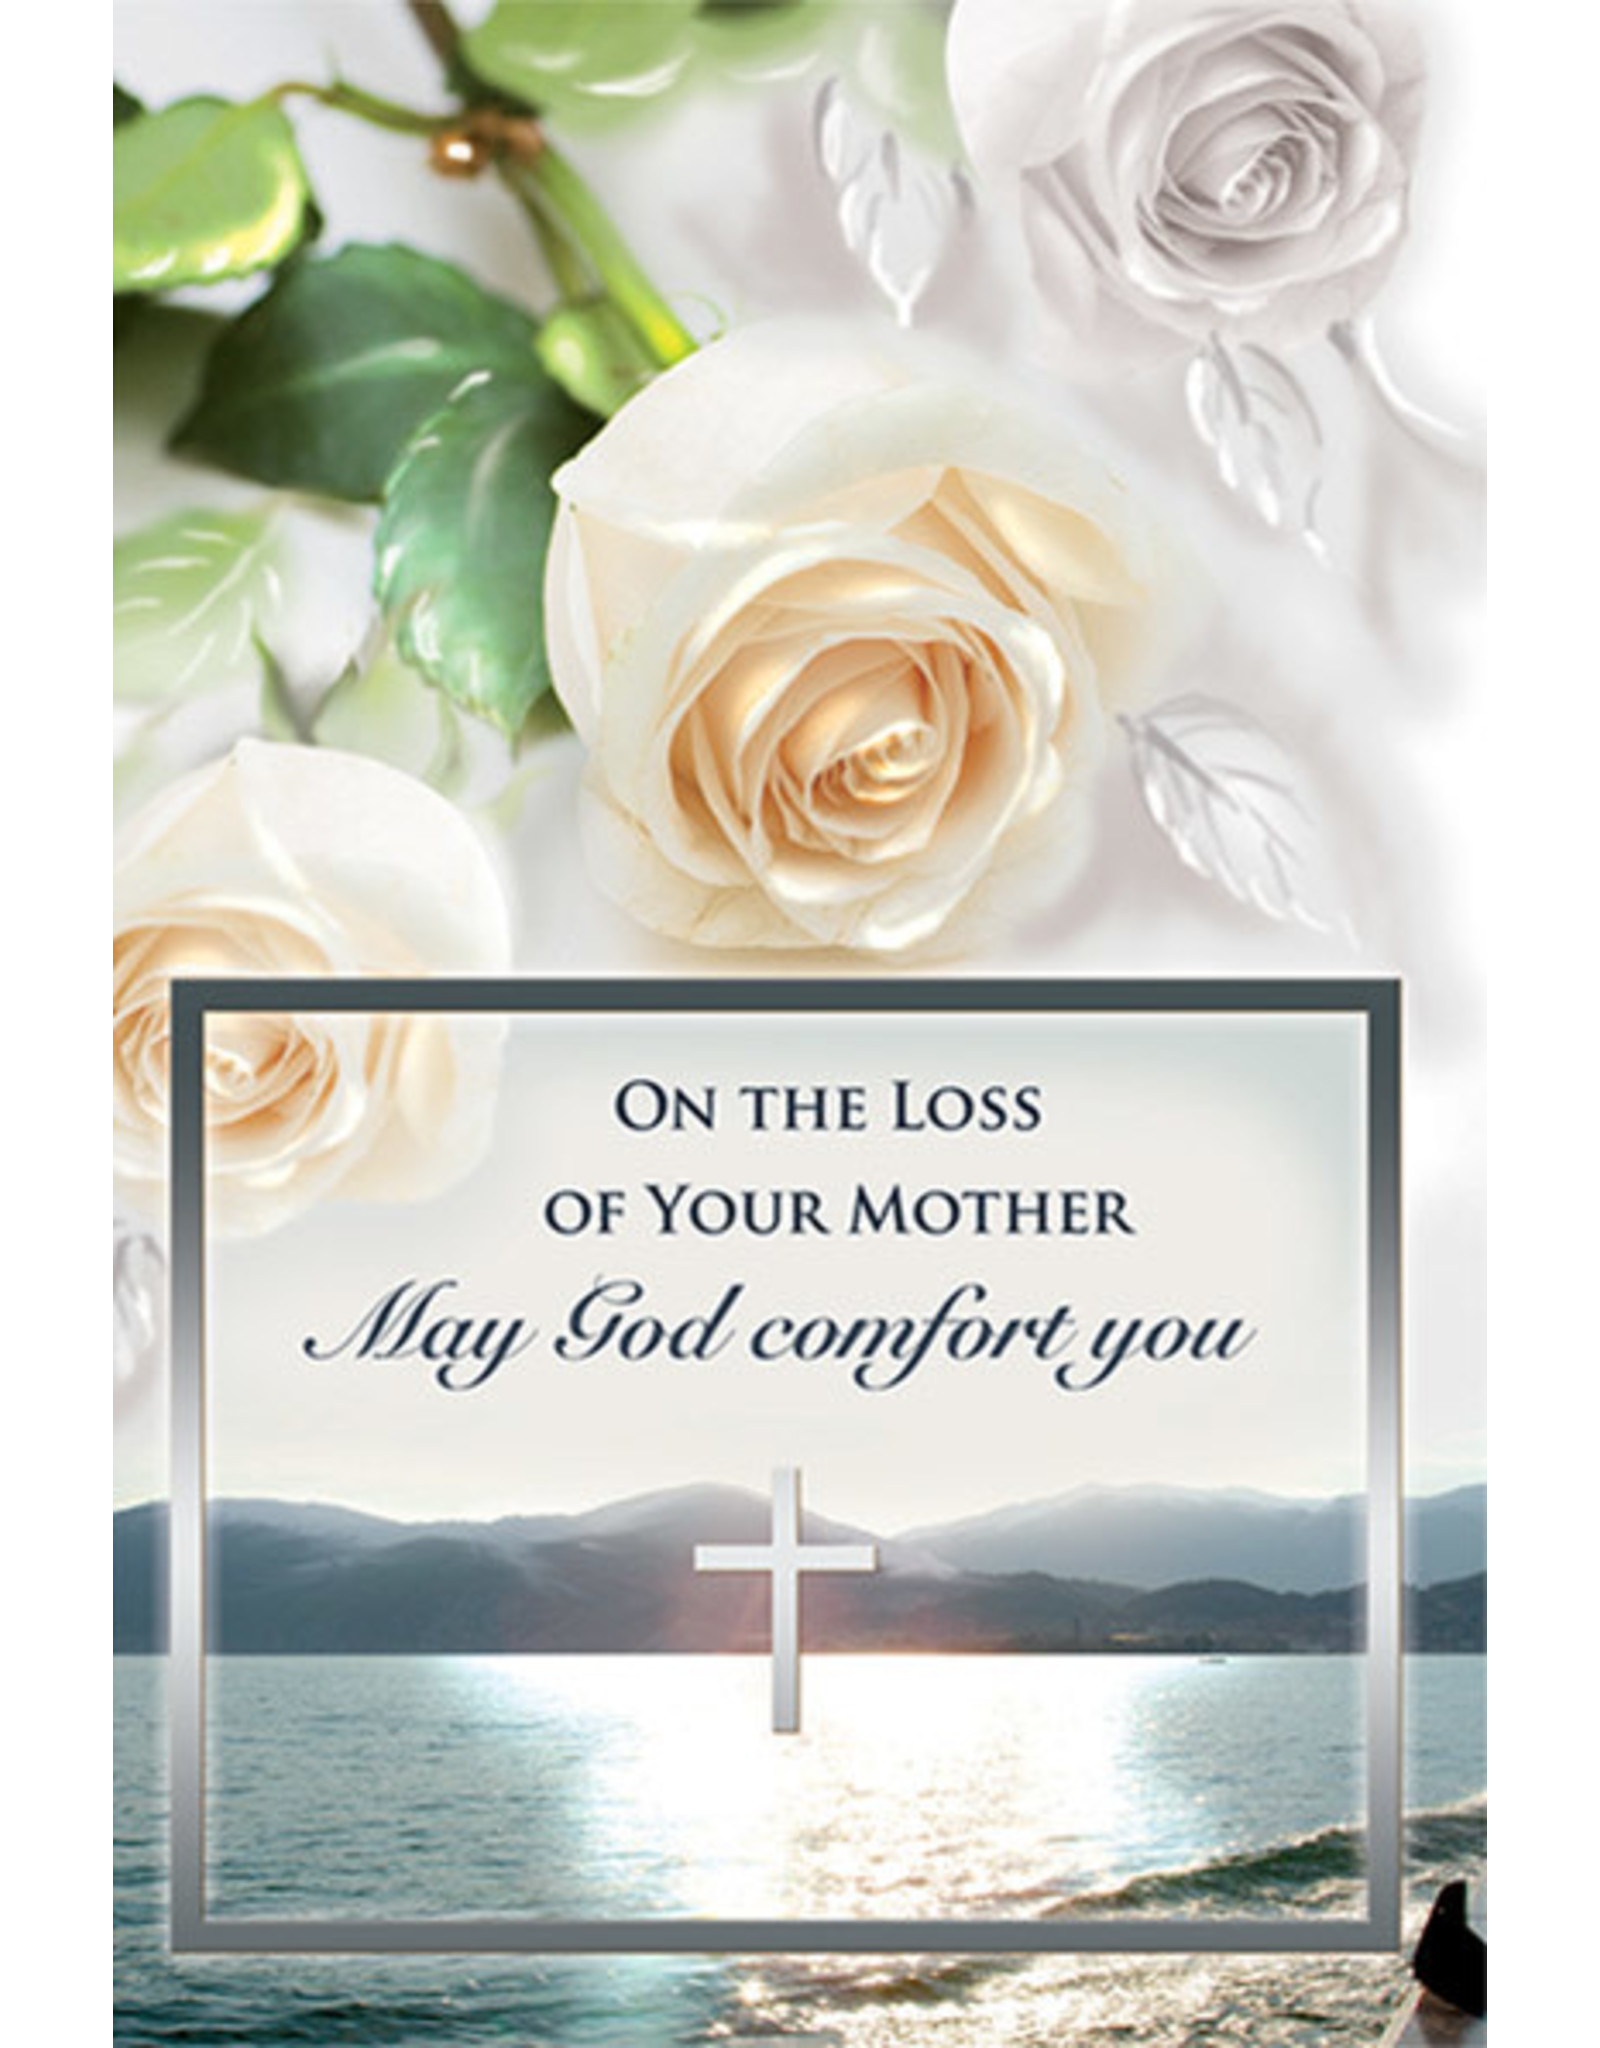 Greetings of Faith Card - Sympathy, Loss of Mother (White Roses)